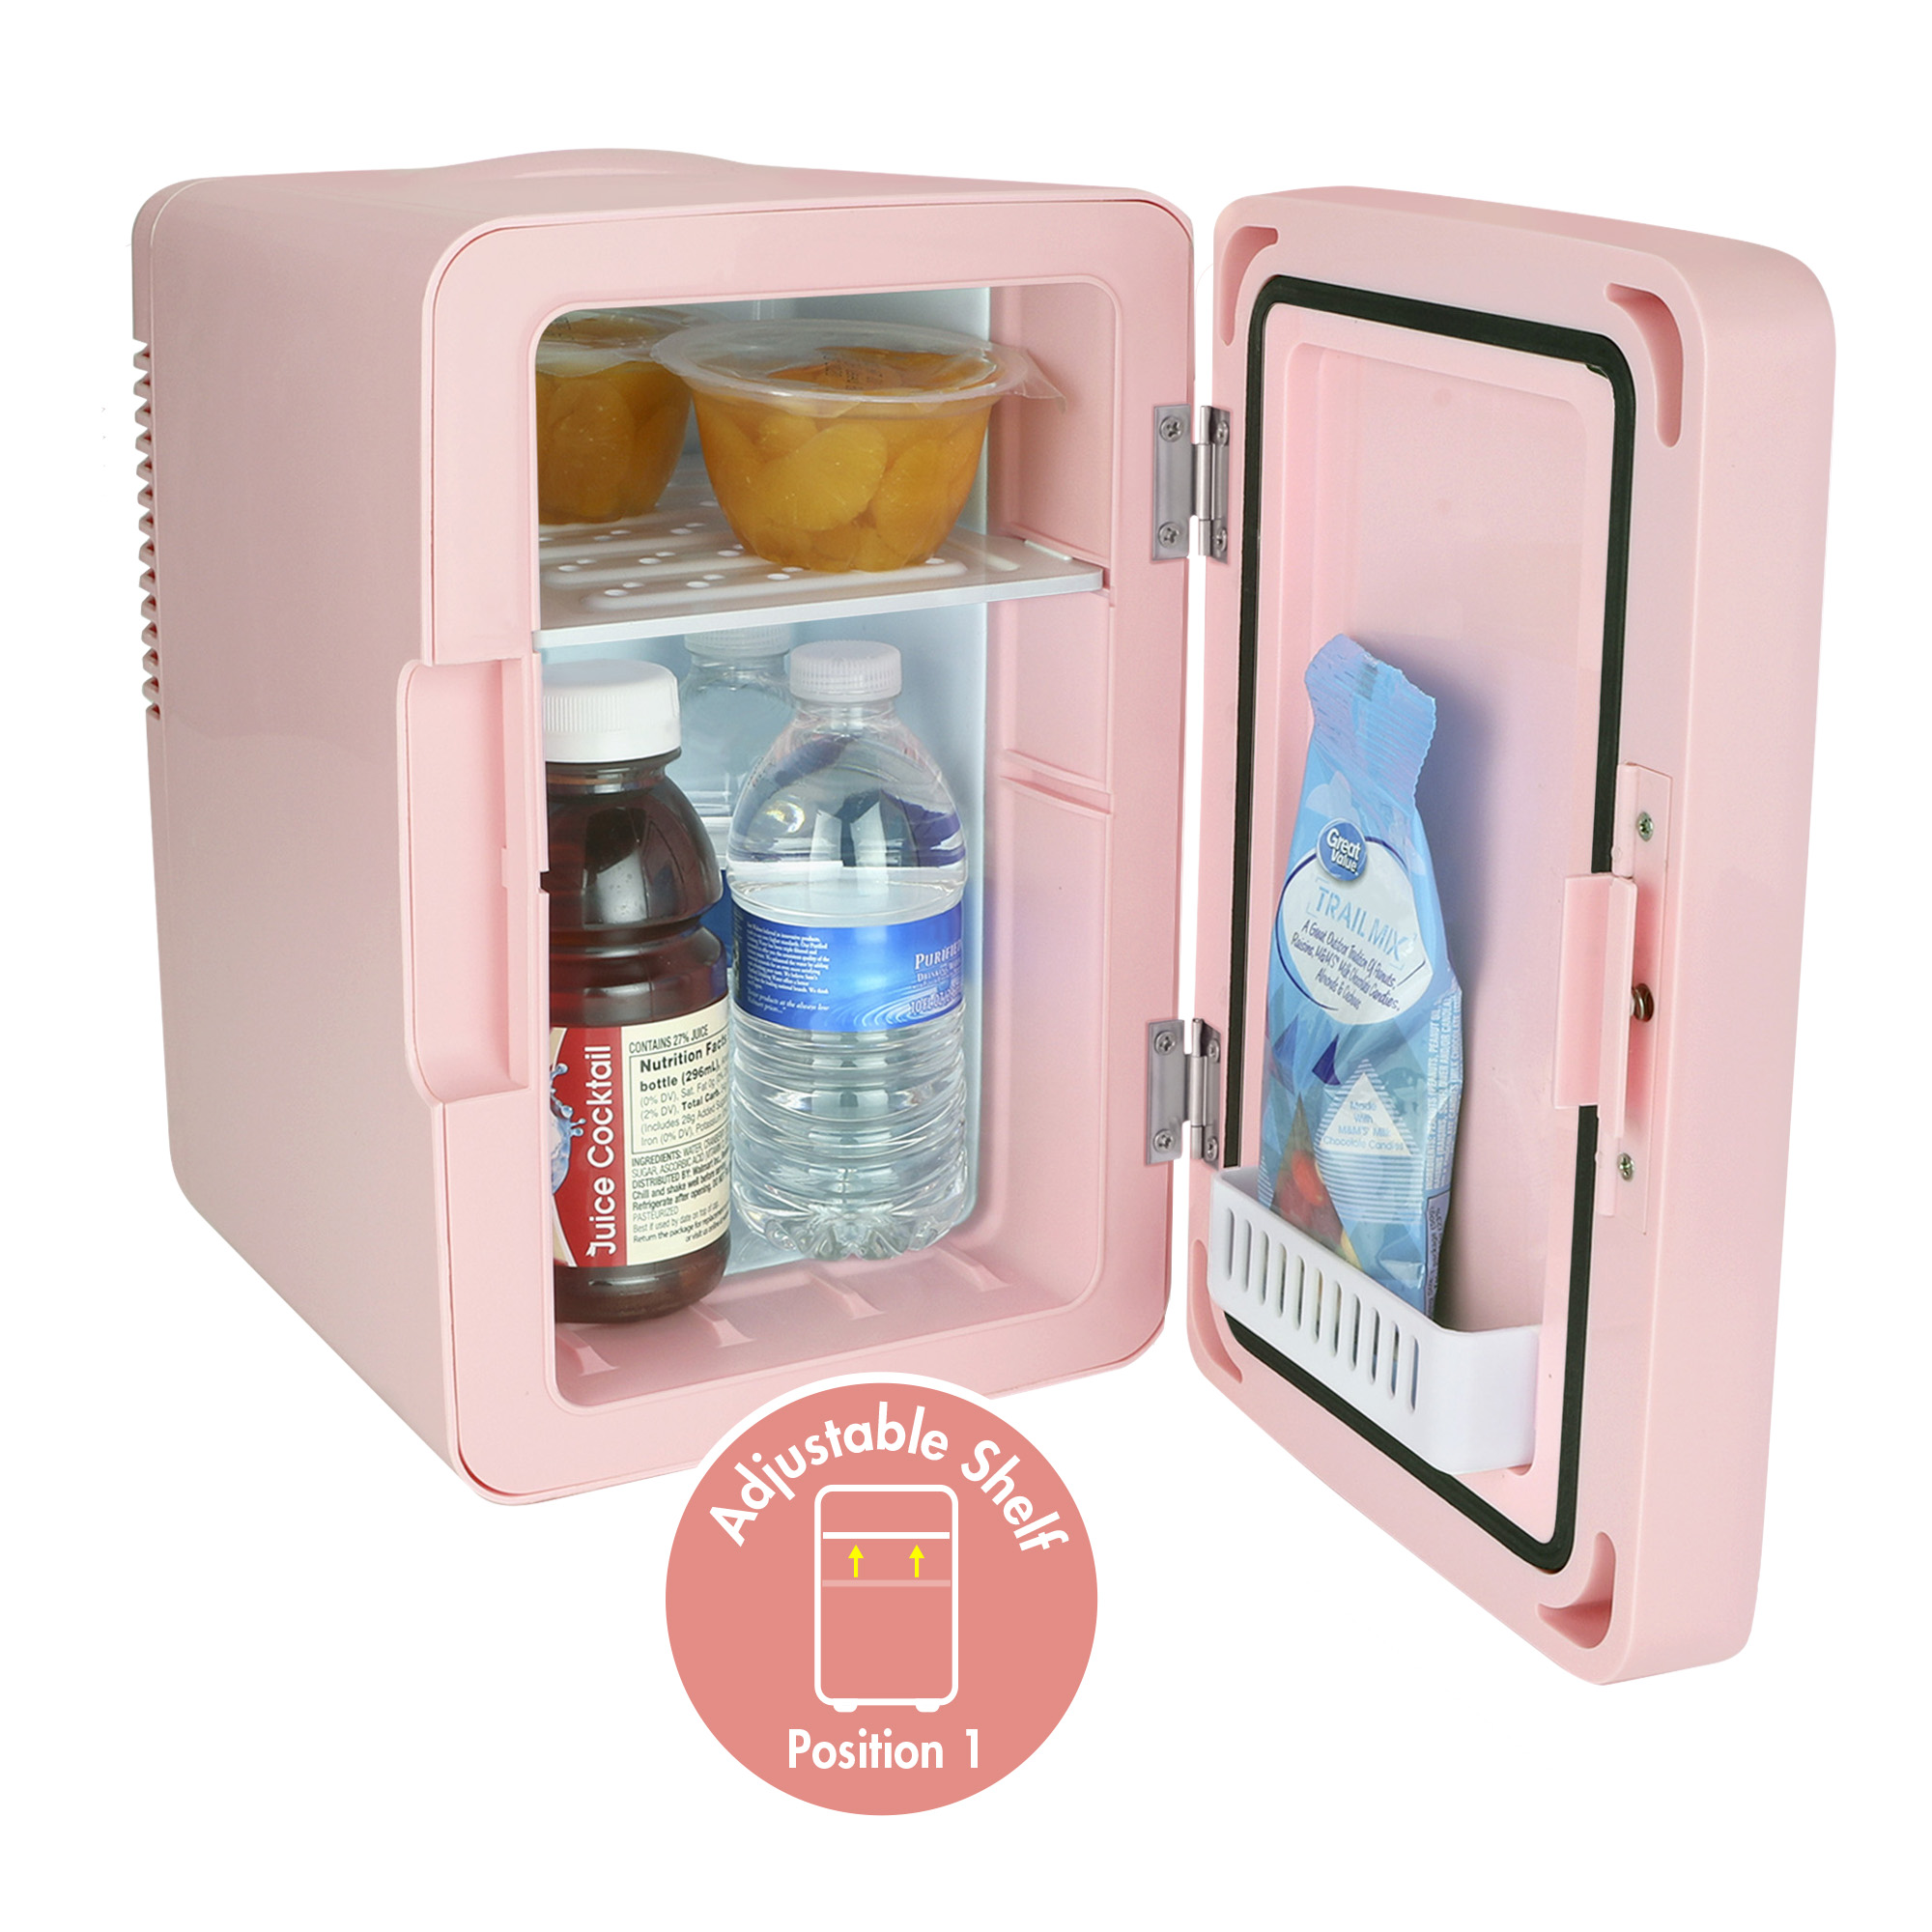 Personal Chiller LED Lighted Mini Fridge with Mirror Door, Coral - image 4 of 14